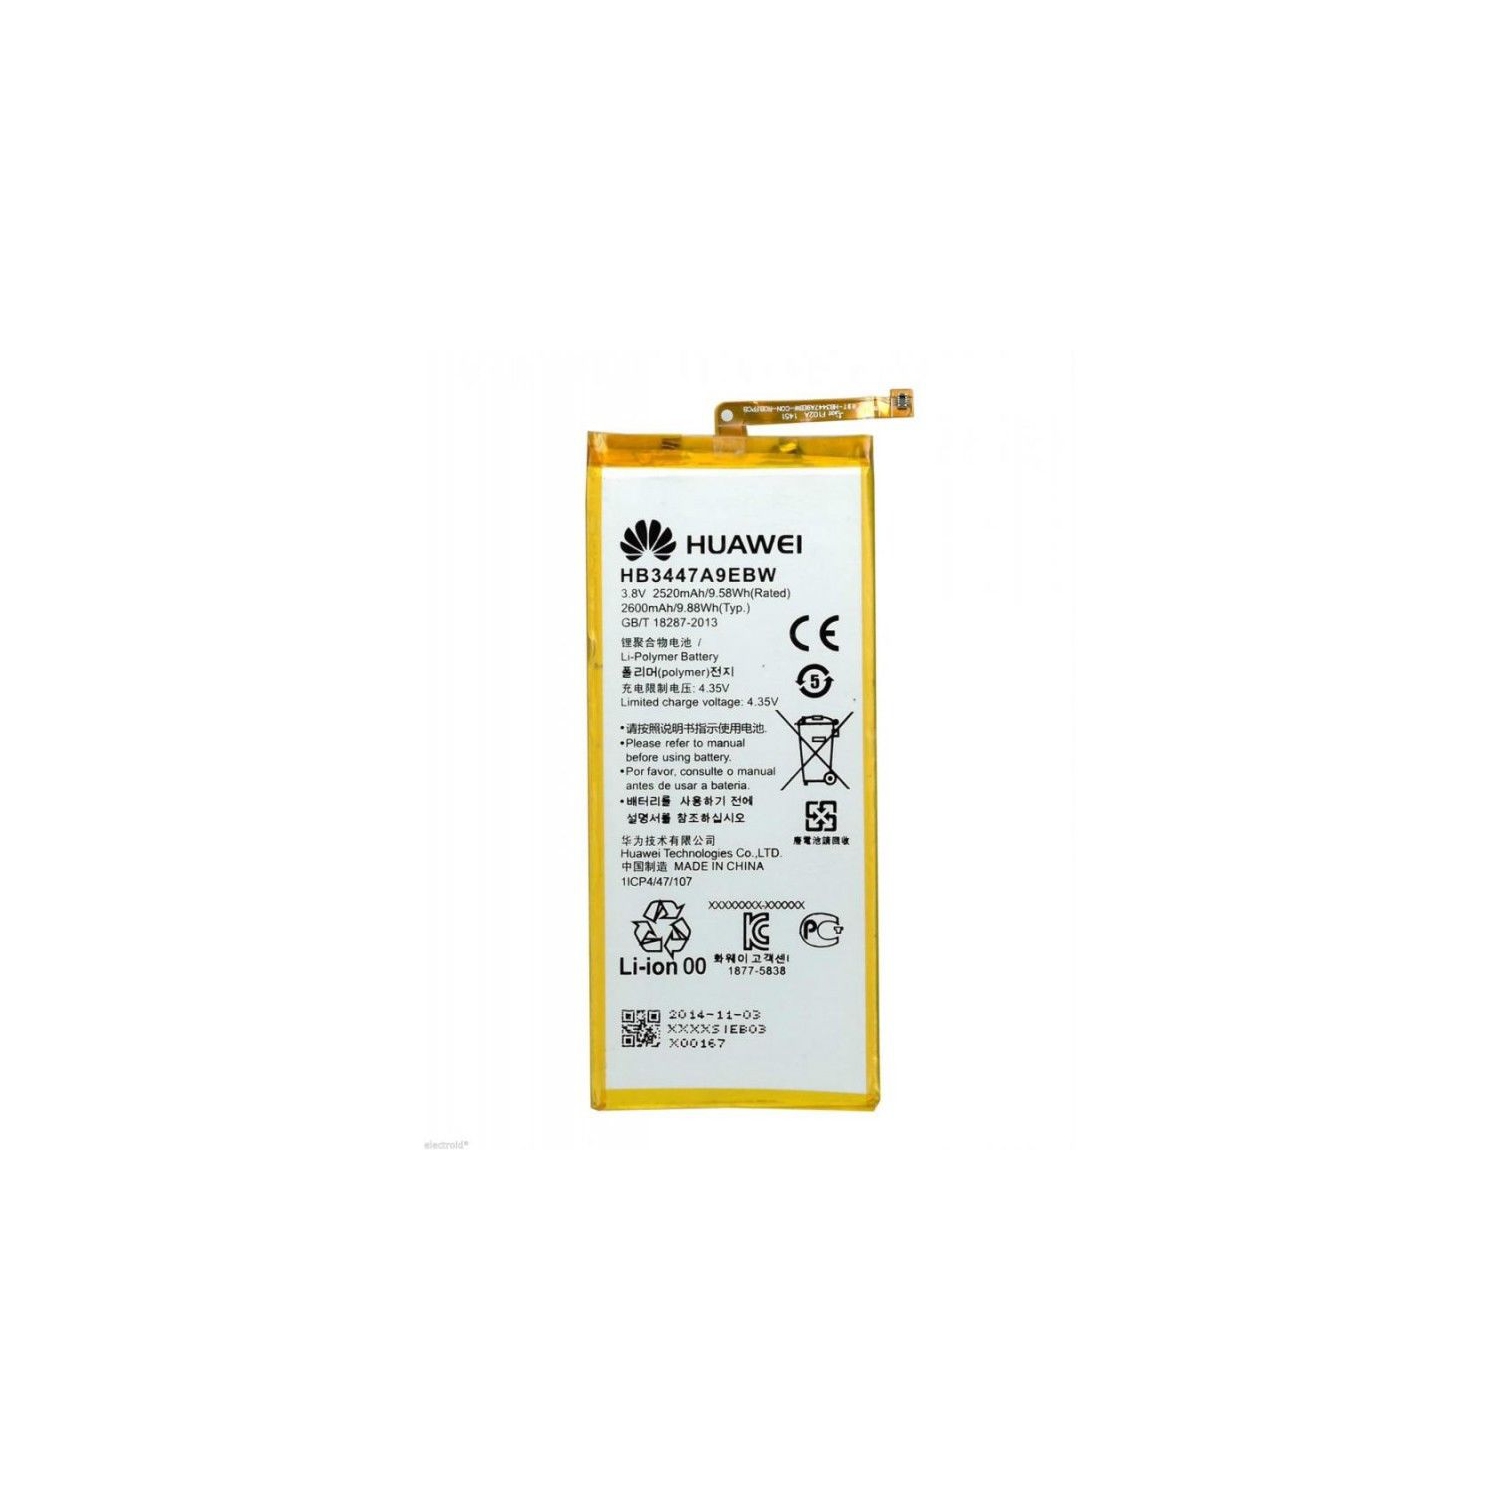 Replacement Battery for Huawei Ascend P8, HB3447A9EBW